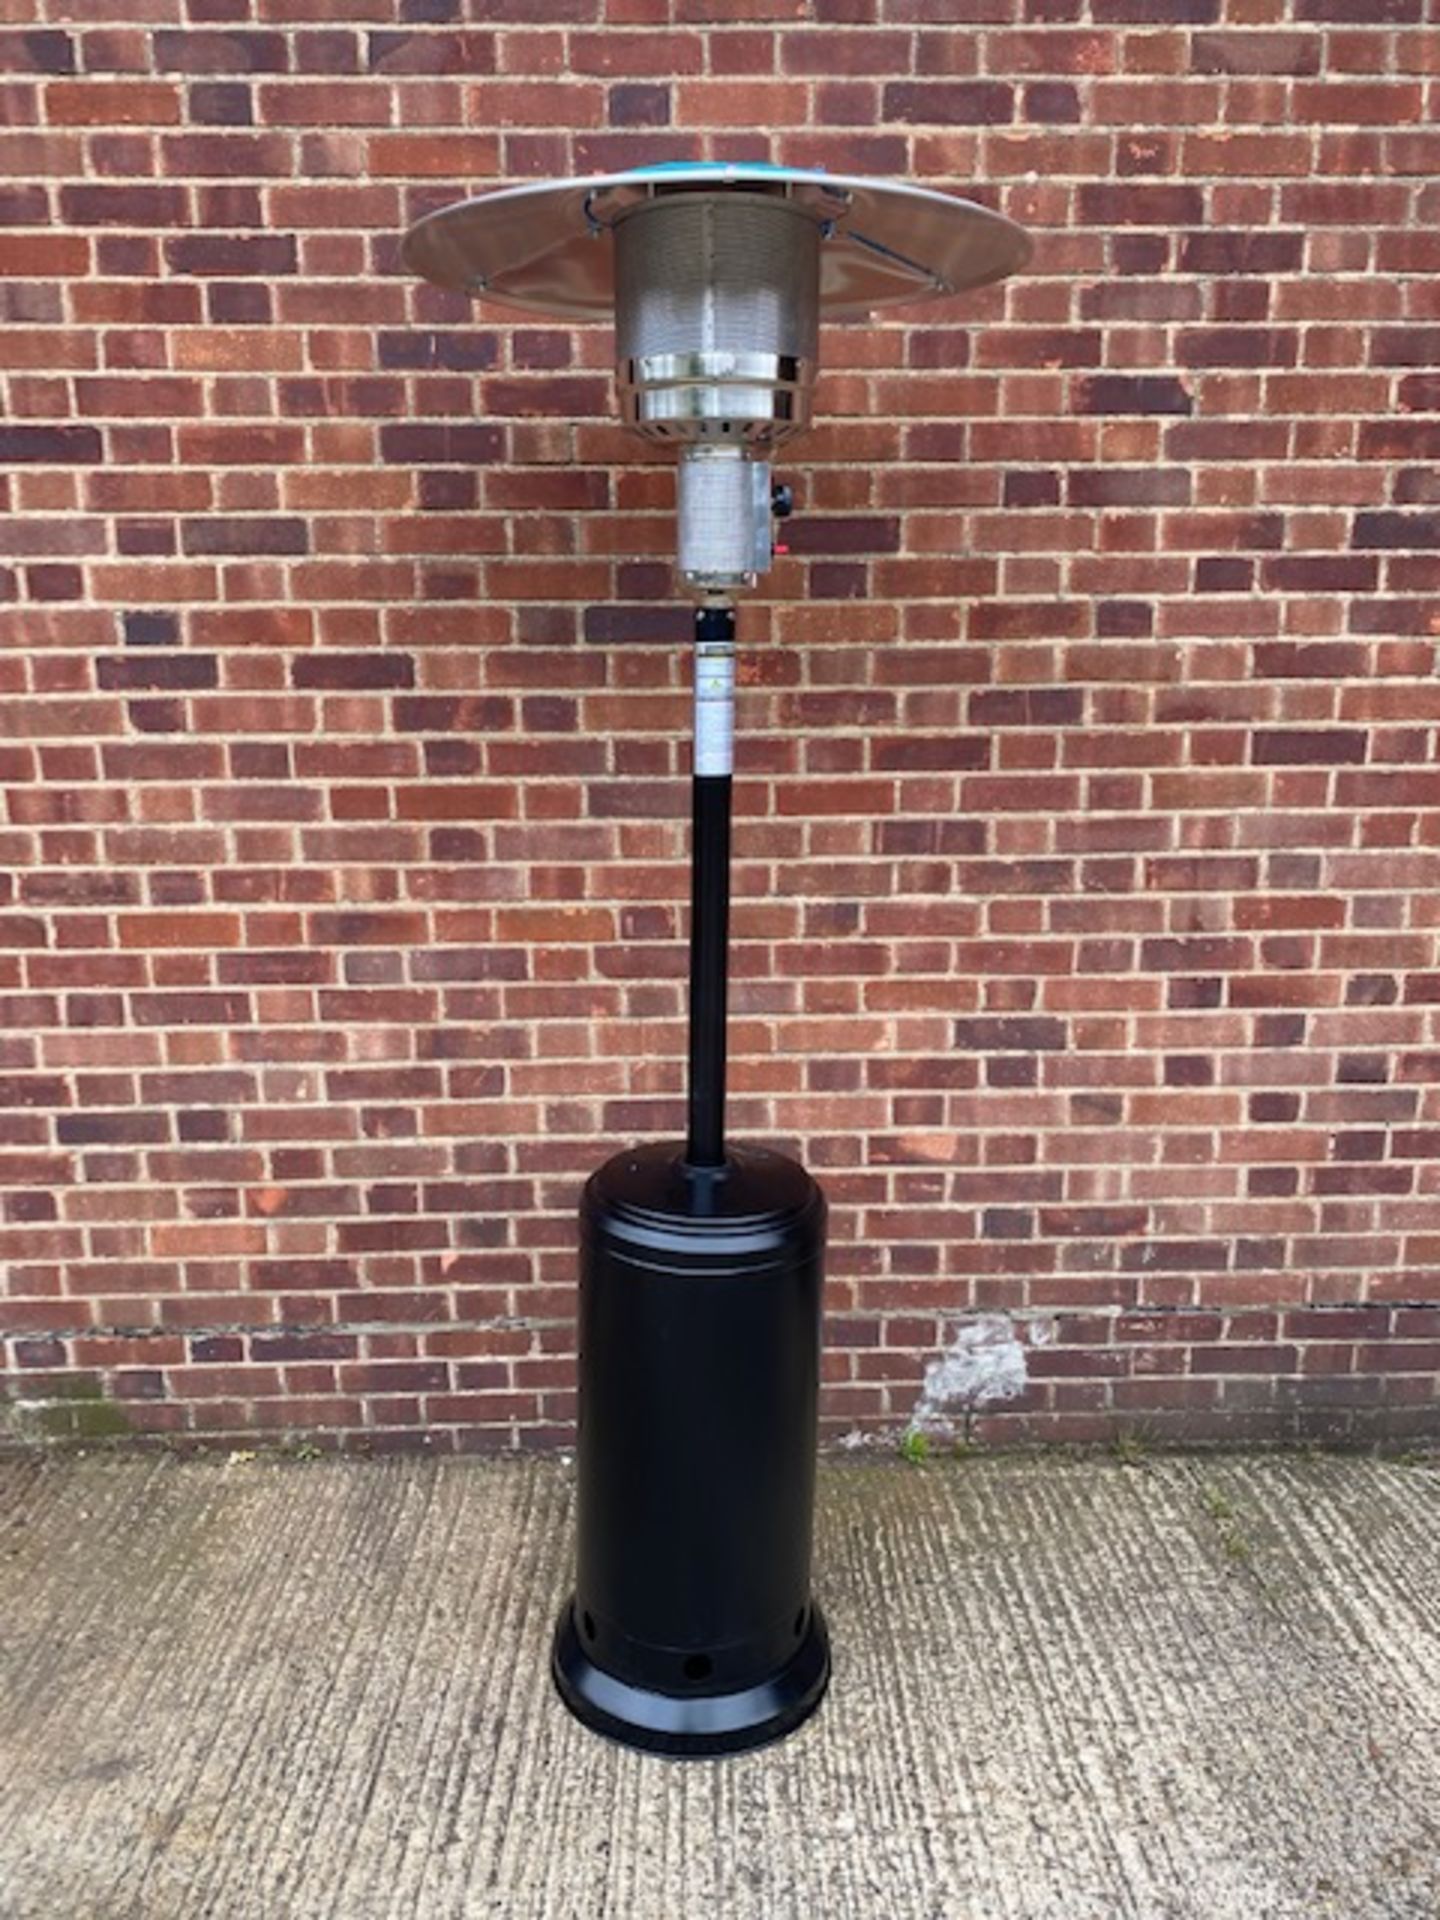 + VAT Brand New Chelsea Garden Company Garden Patio Heater With Cover - Item Is Available From - Image 3 of 9